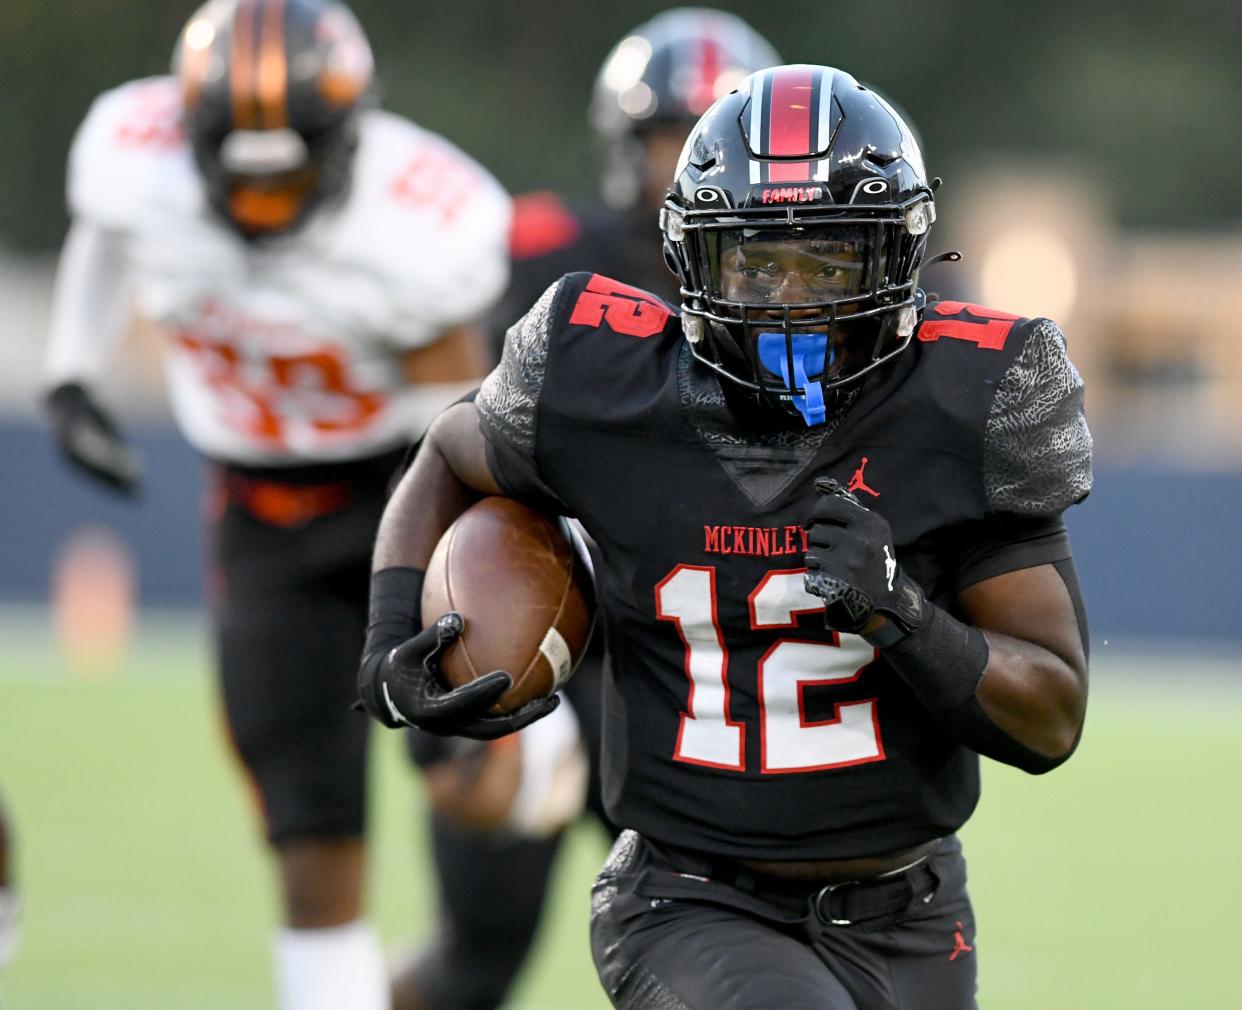 McKinley's Nino Hill runs for a first down in the first half against Green, Friday, Sept. 15, 2023, in Canton.